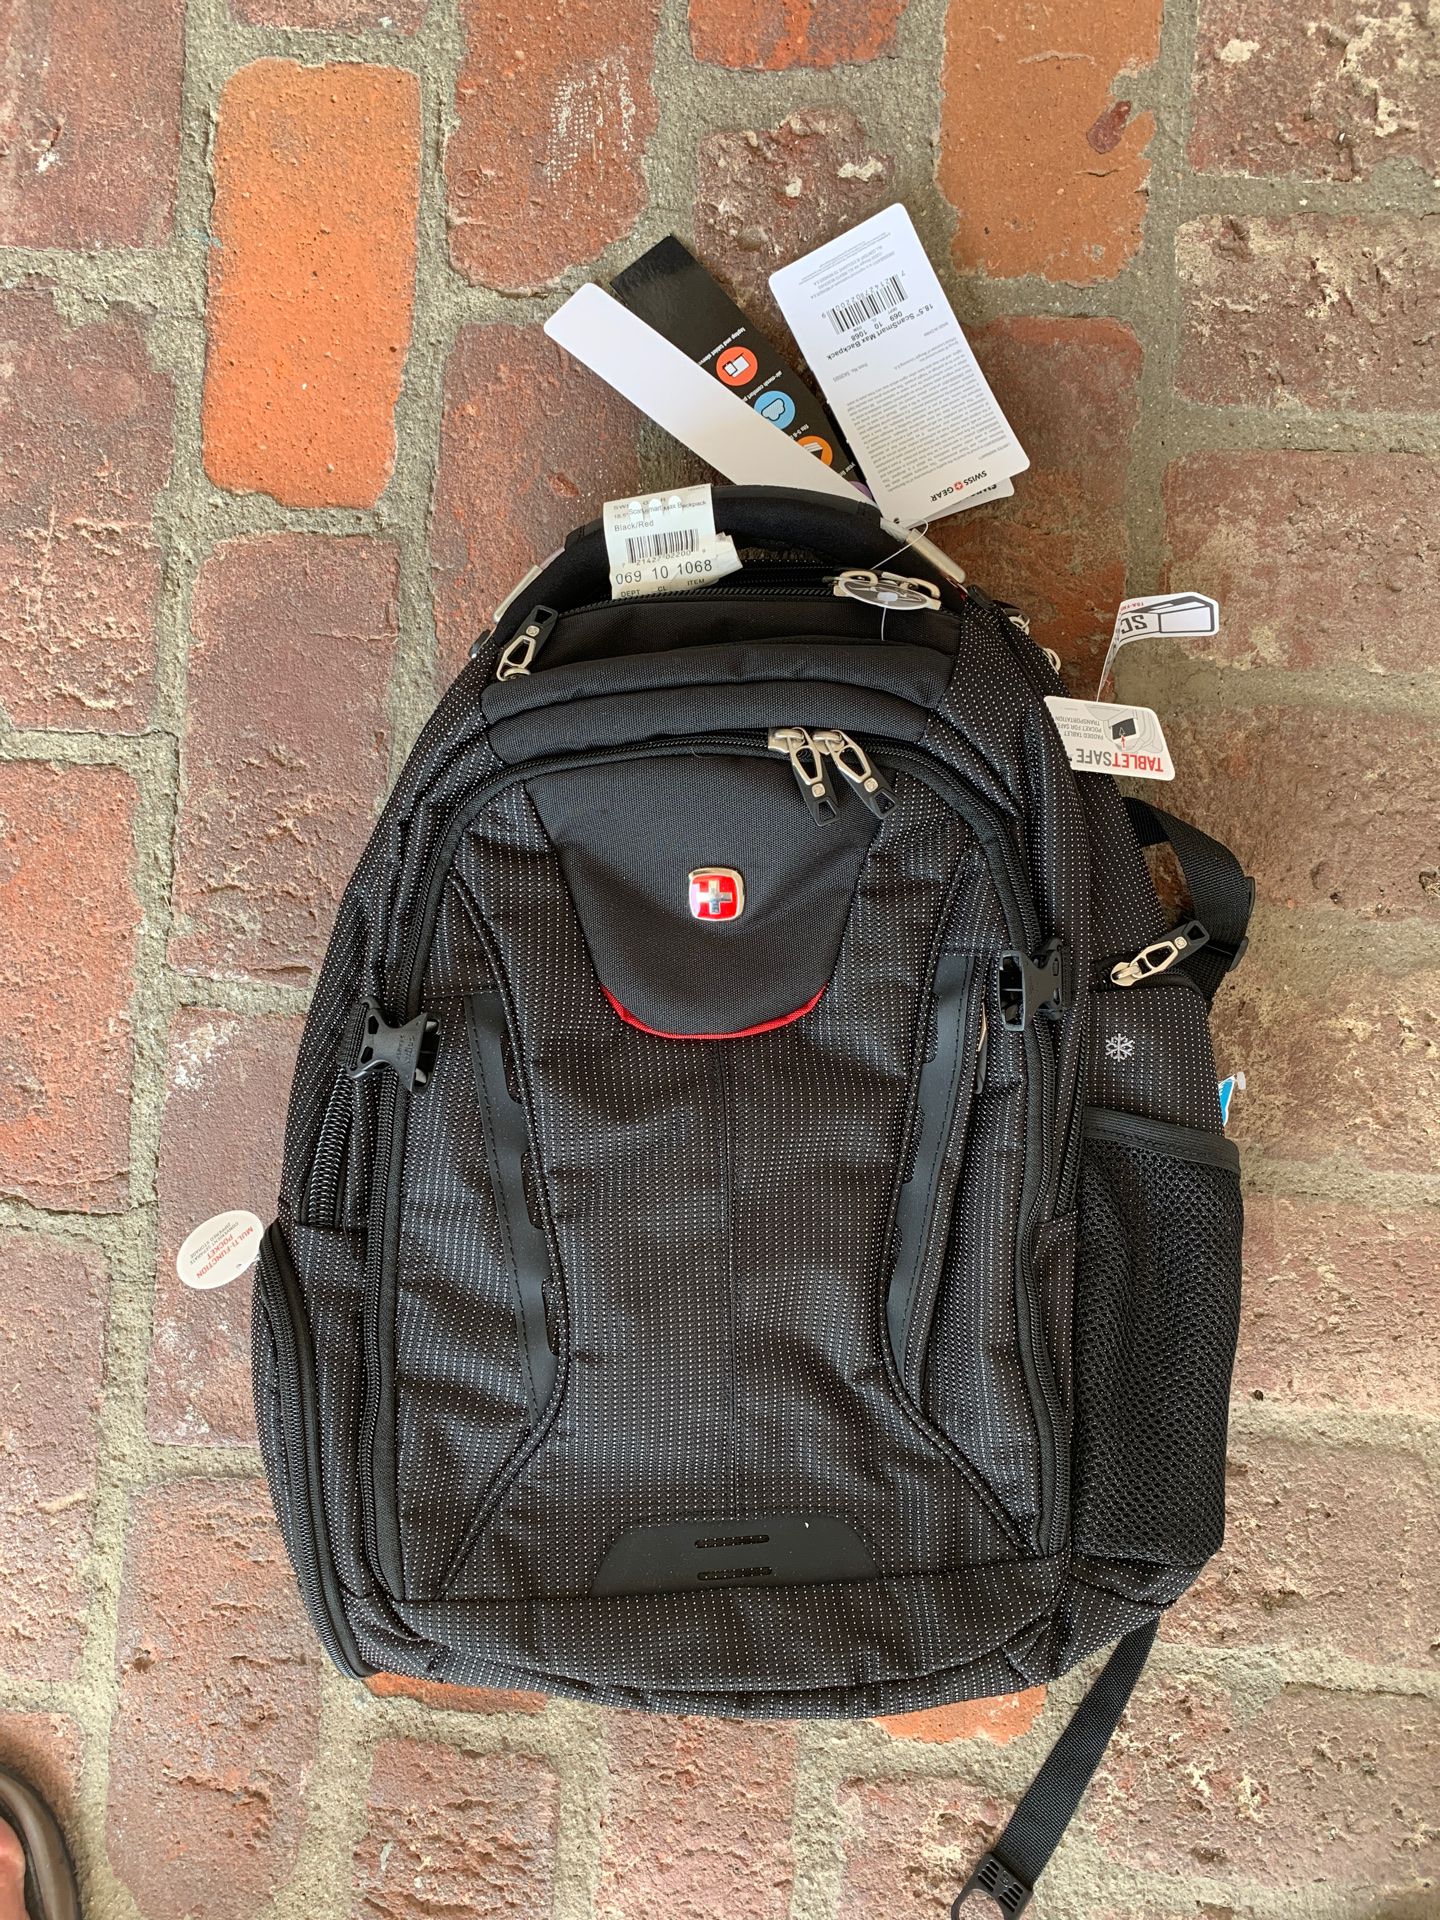 Swiss army backpack new with tags